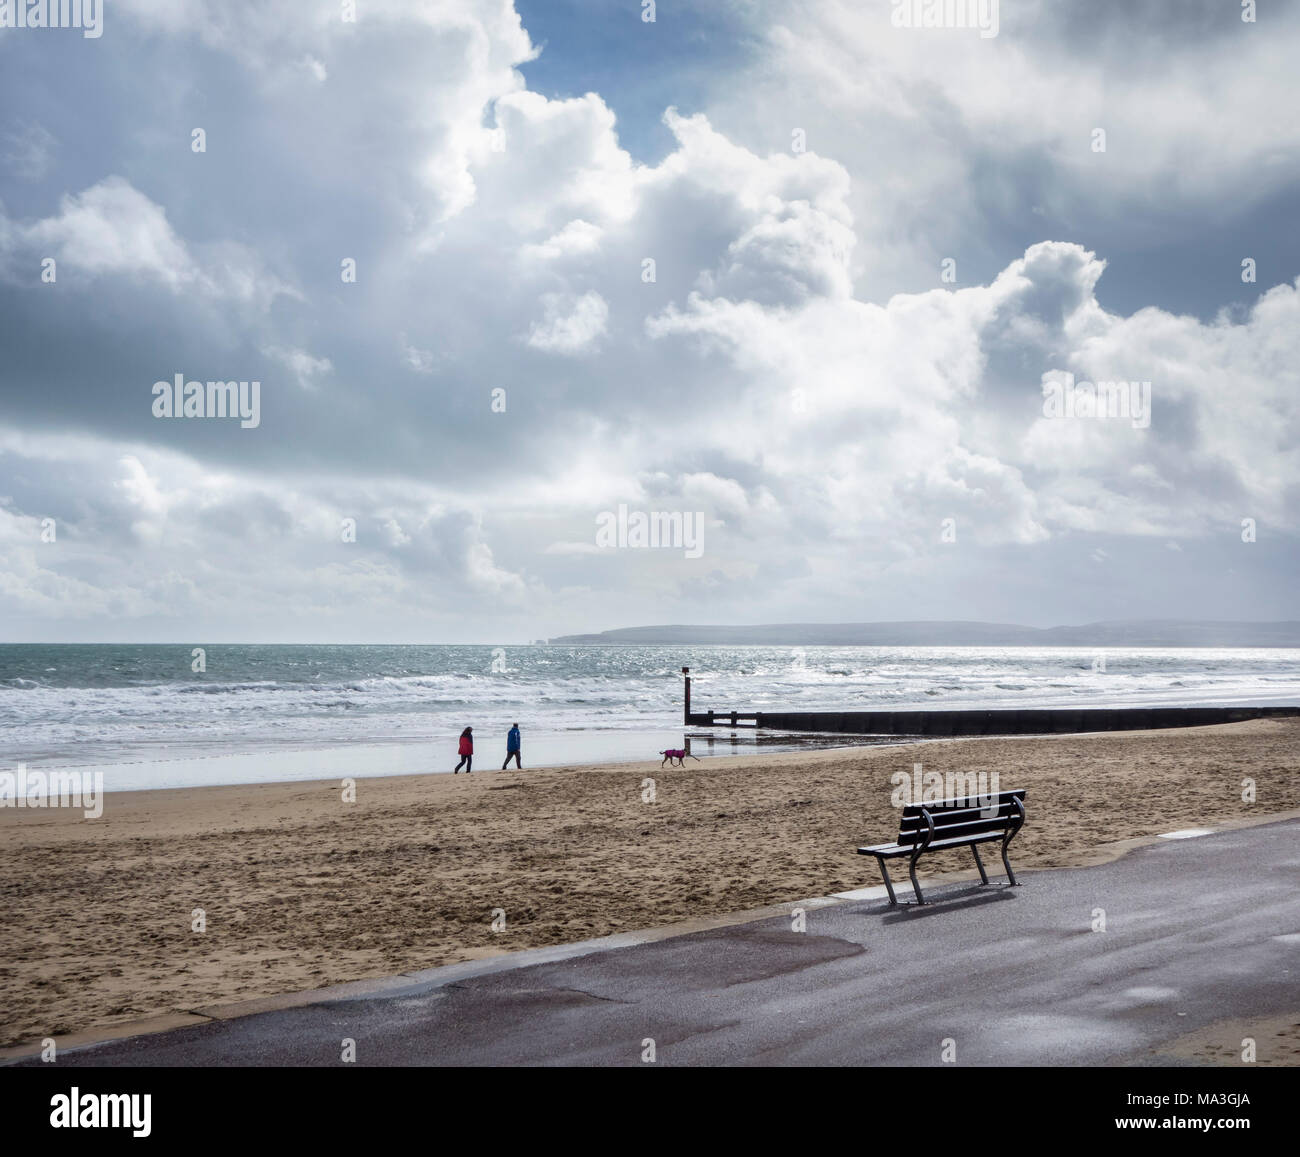 Bournemouth, UK. 29th March 2018. Dog walkers with sunshine and showeres sweeping over Poole Bay. ©dbphots/Alamy Live News Stock Photo